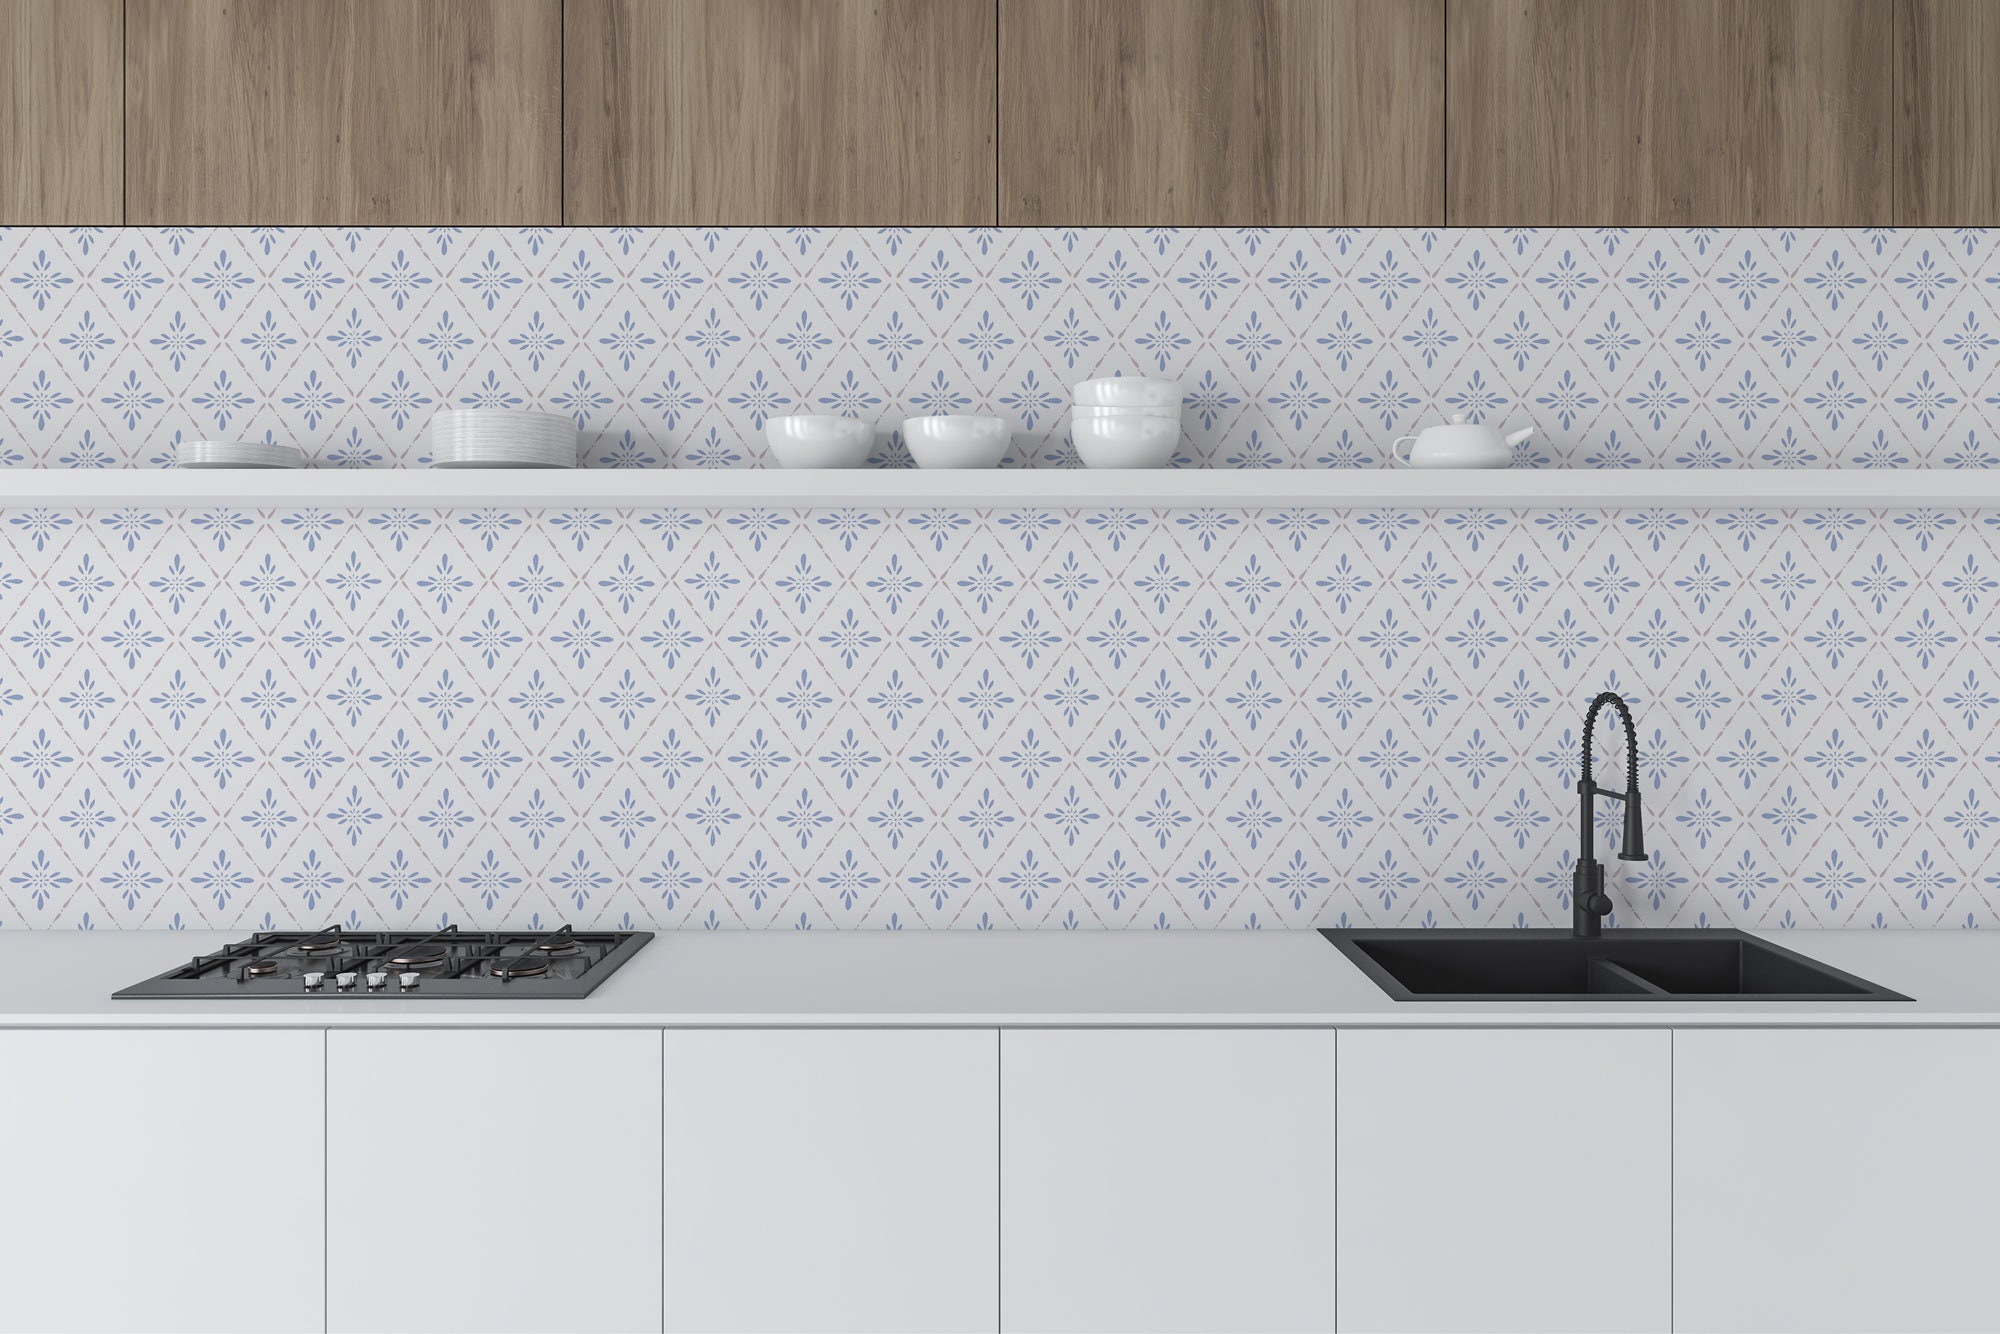 Kitchen wallpaper ideas 10 inspiring looks for your space 